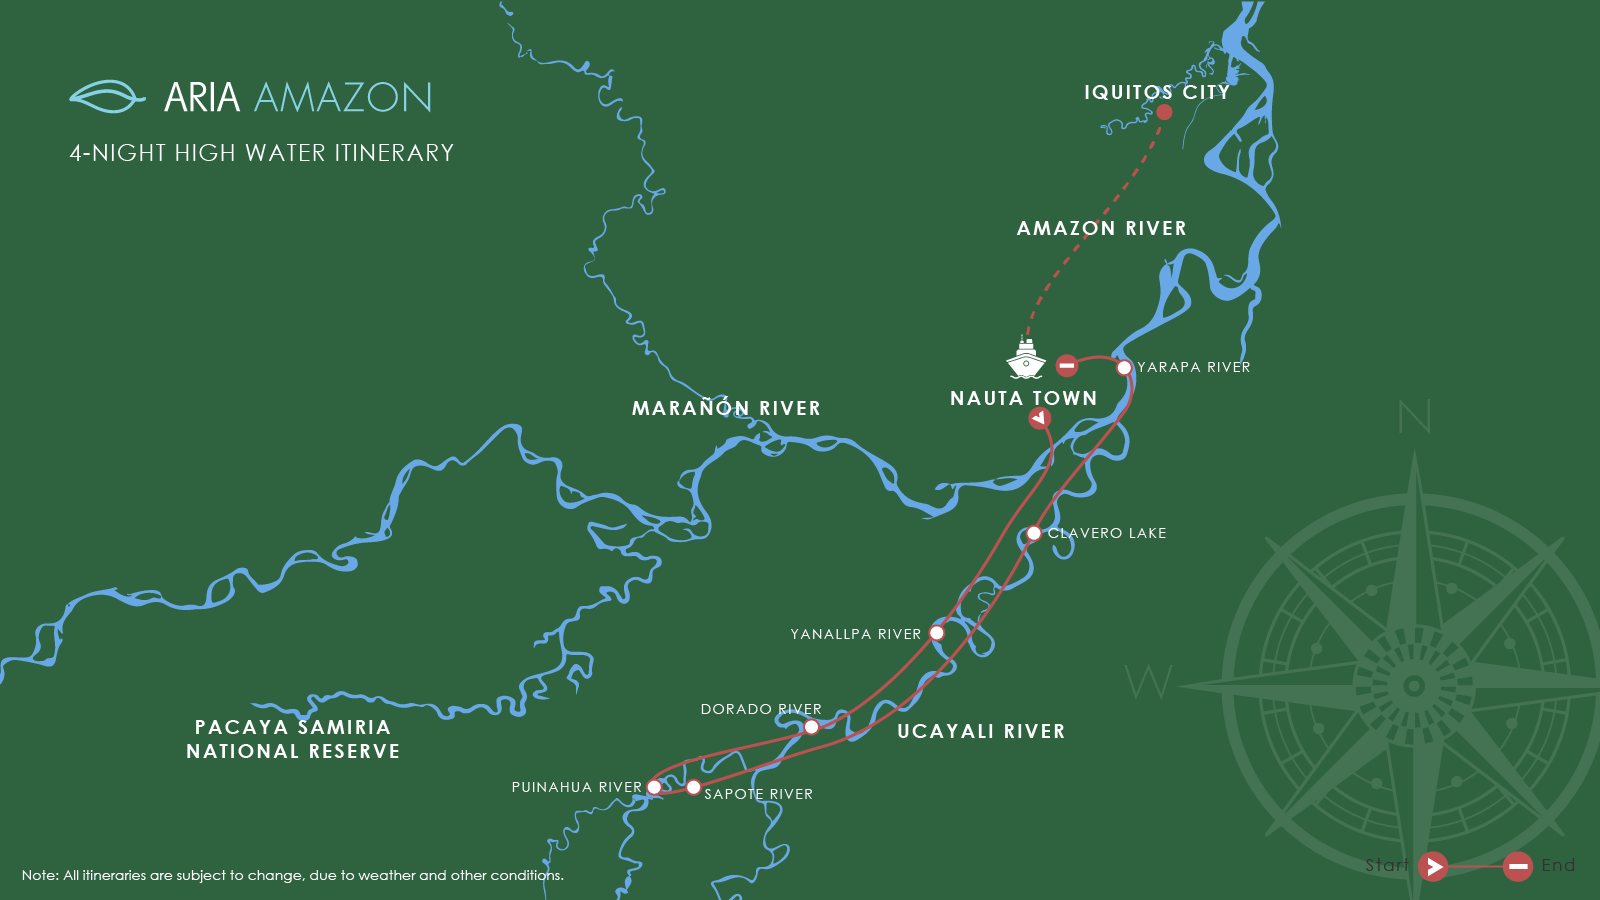 Route map of Aria Amazon River Cruise 5-day high-water itinerary, round-trip from Iquitos, Peru, sailing round-trip from Nauta with visits along the Ucayali river.